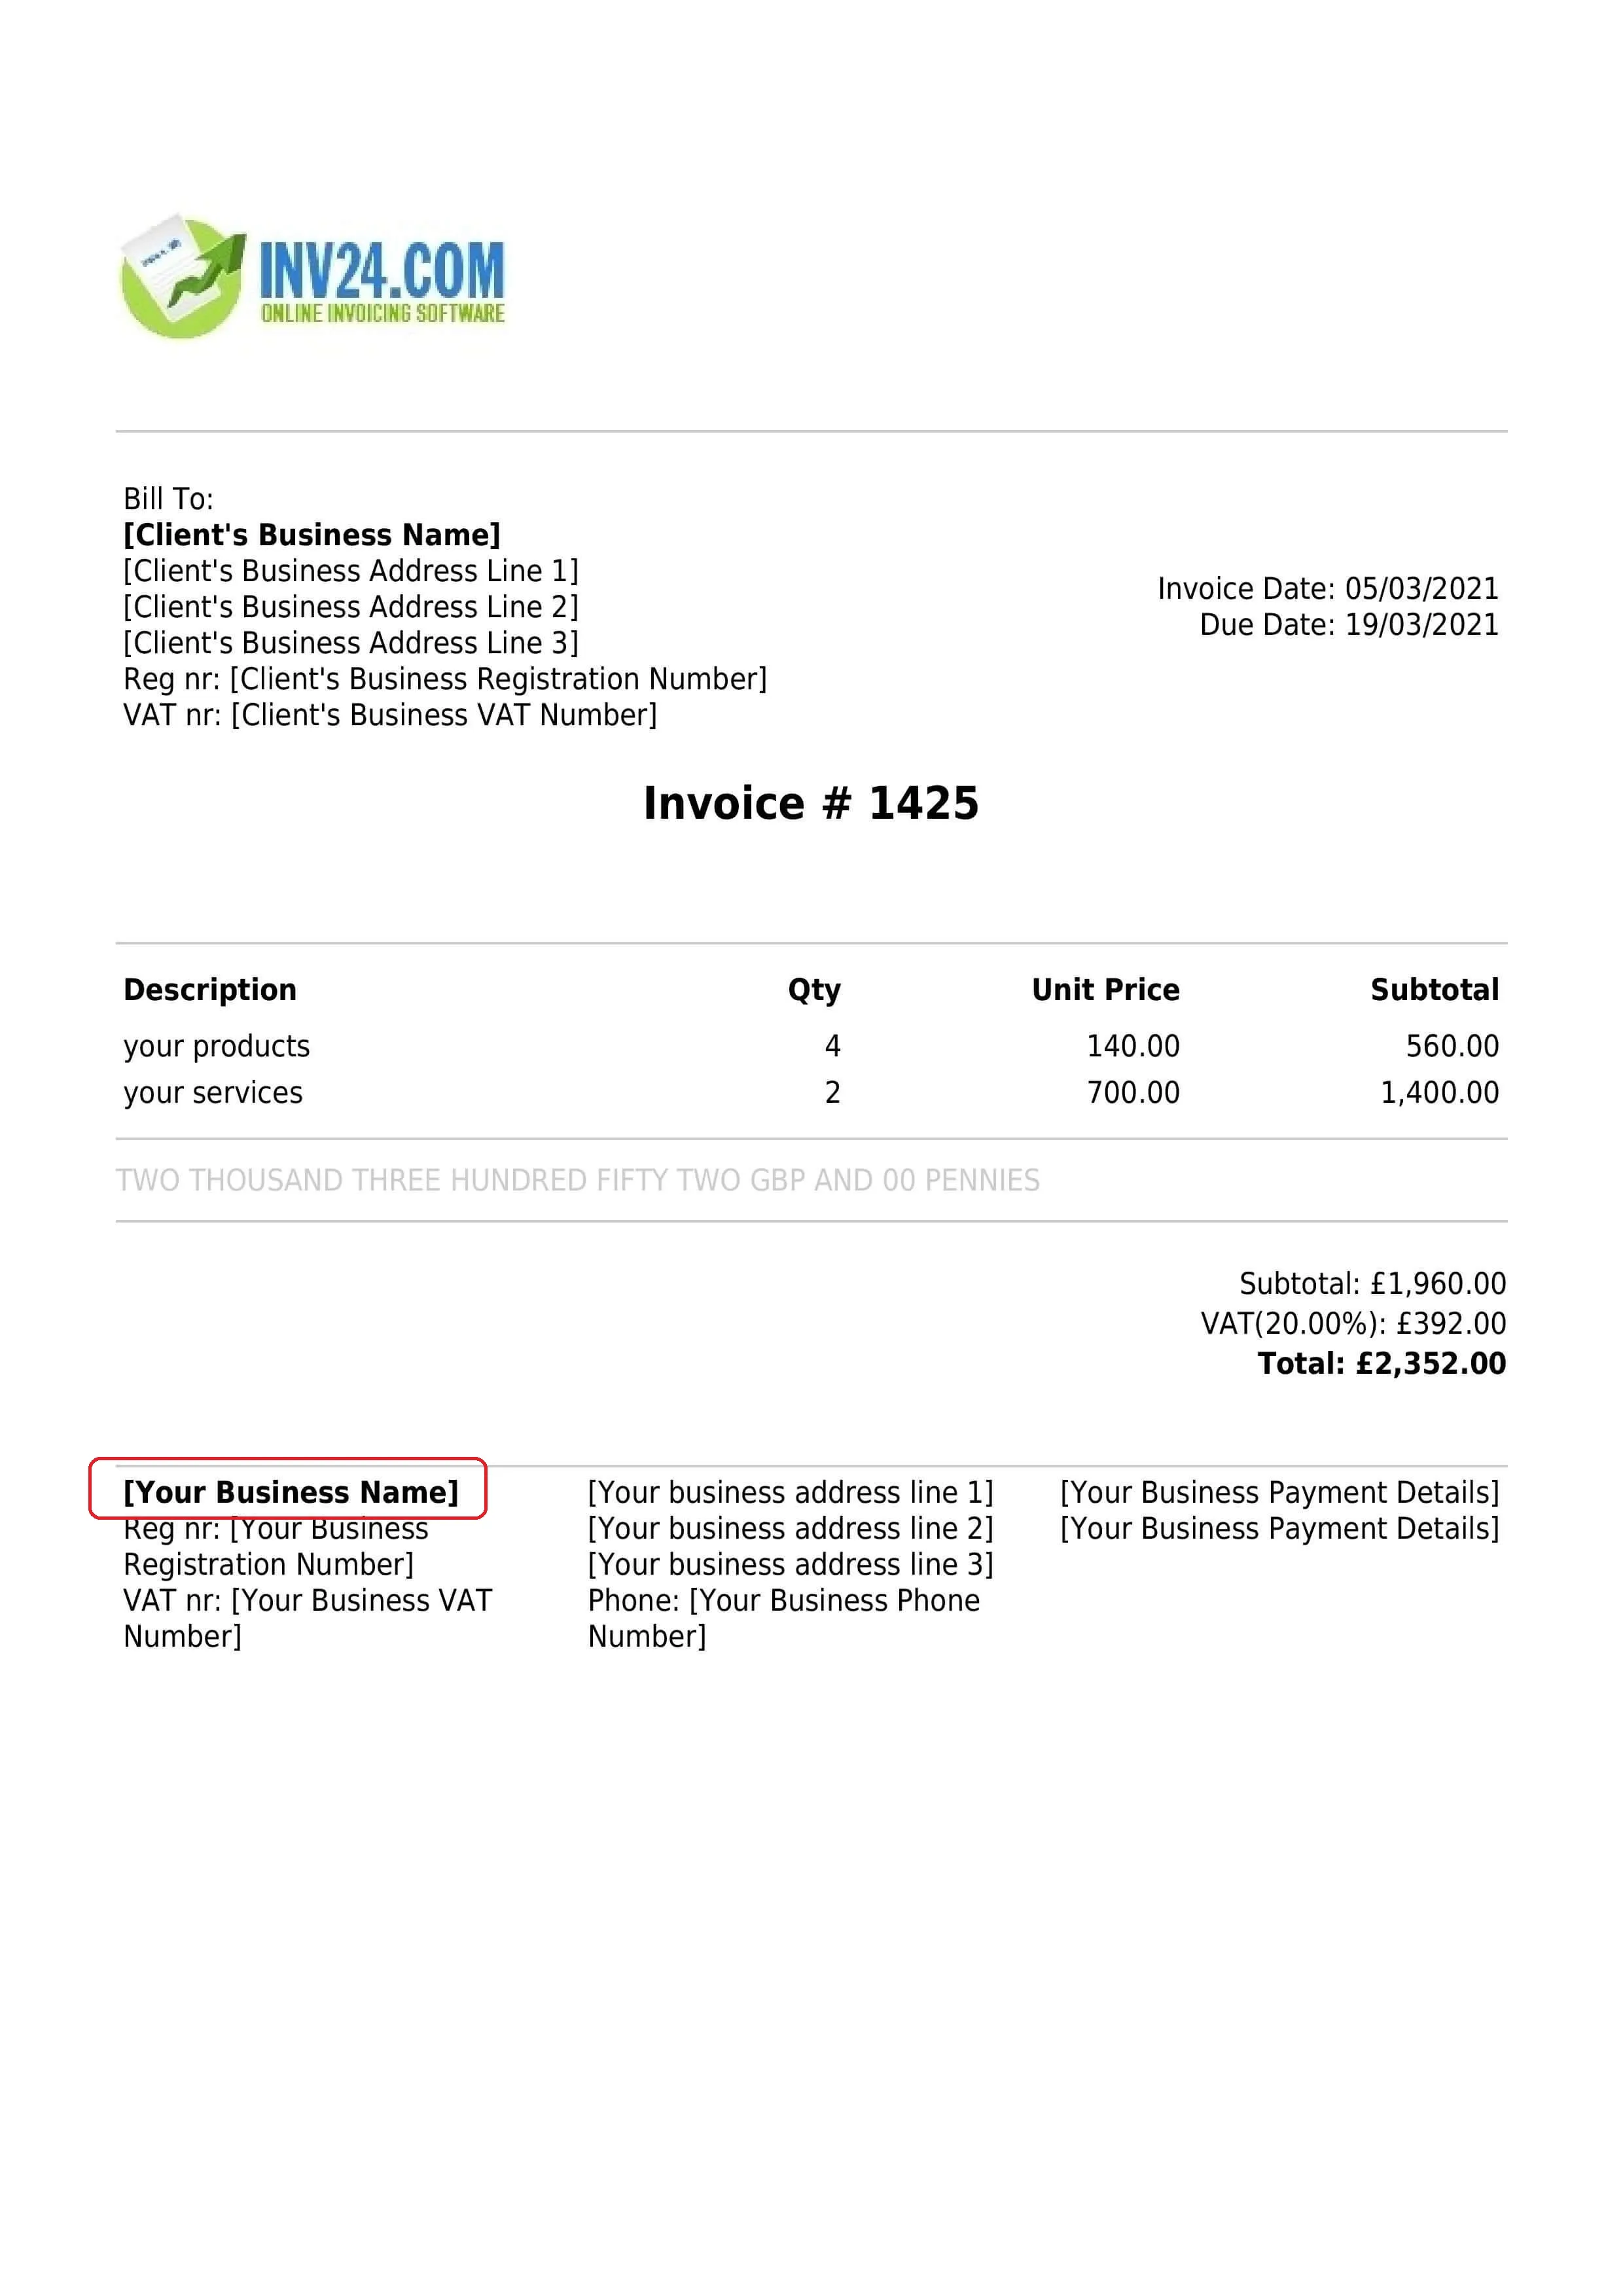 seller business name on the invoice